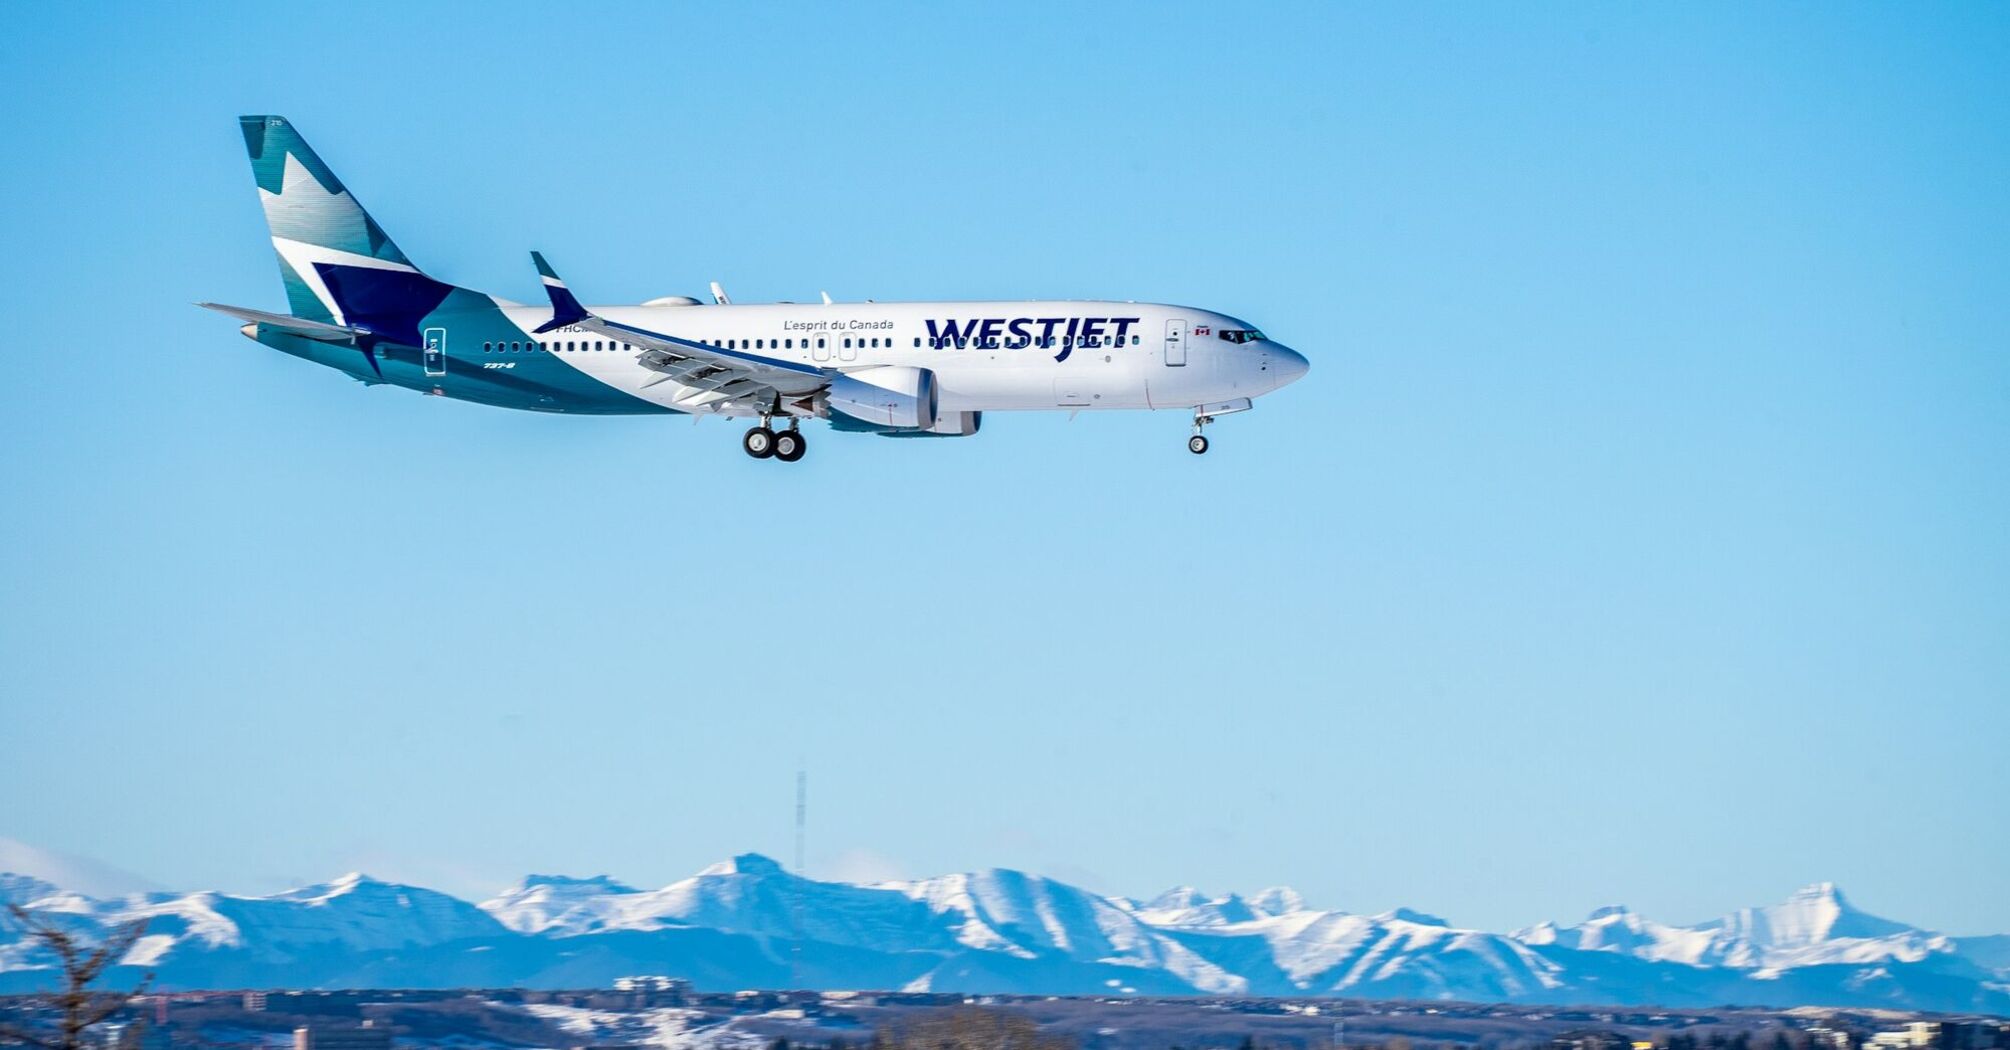 WestJet aircraft in flight with mountains in the background